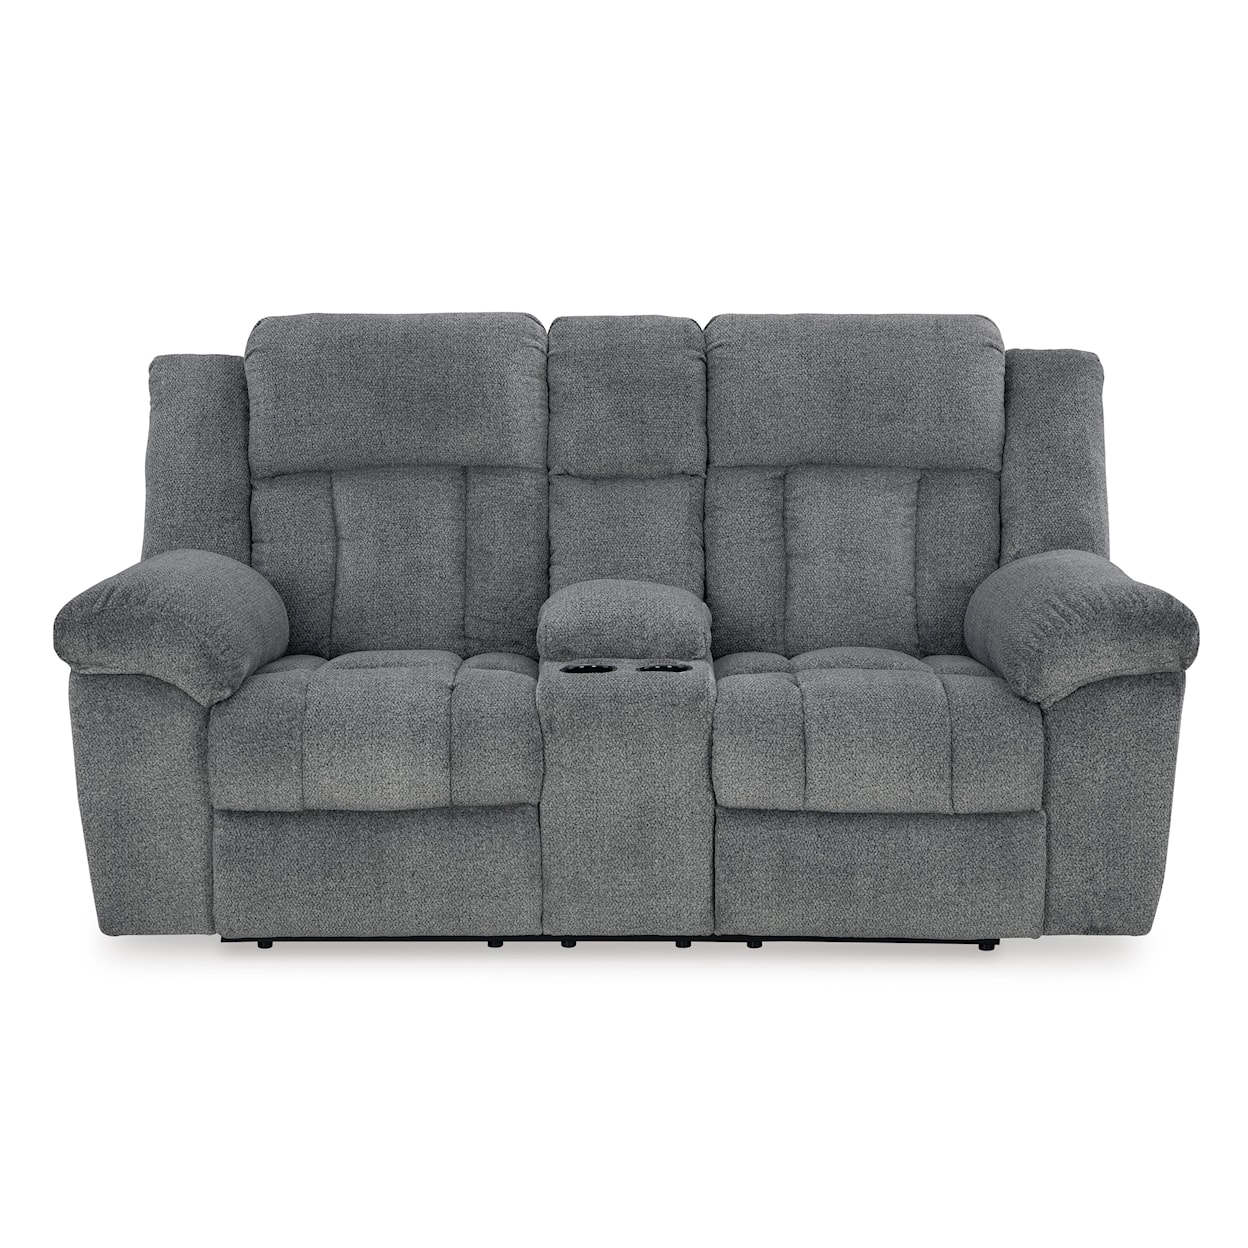 Signature Design by Ashley Tip-Off PWR REC Loveseat/CON/ADJ HDRST